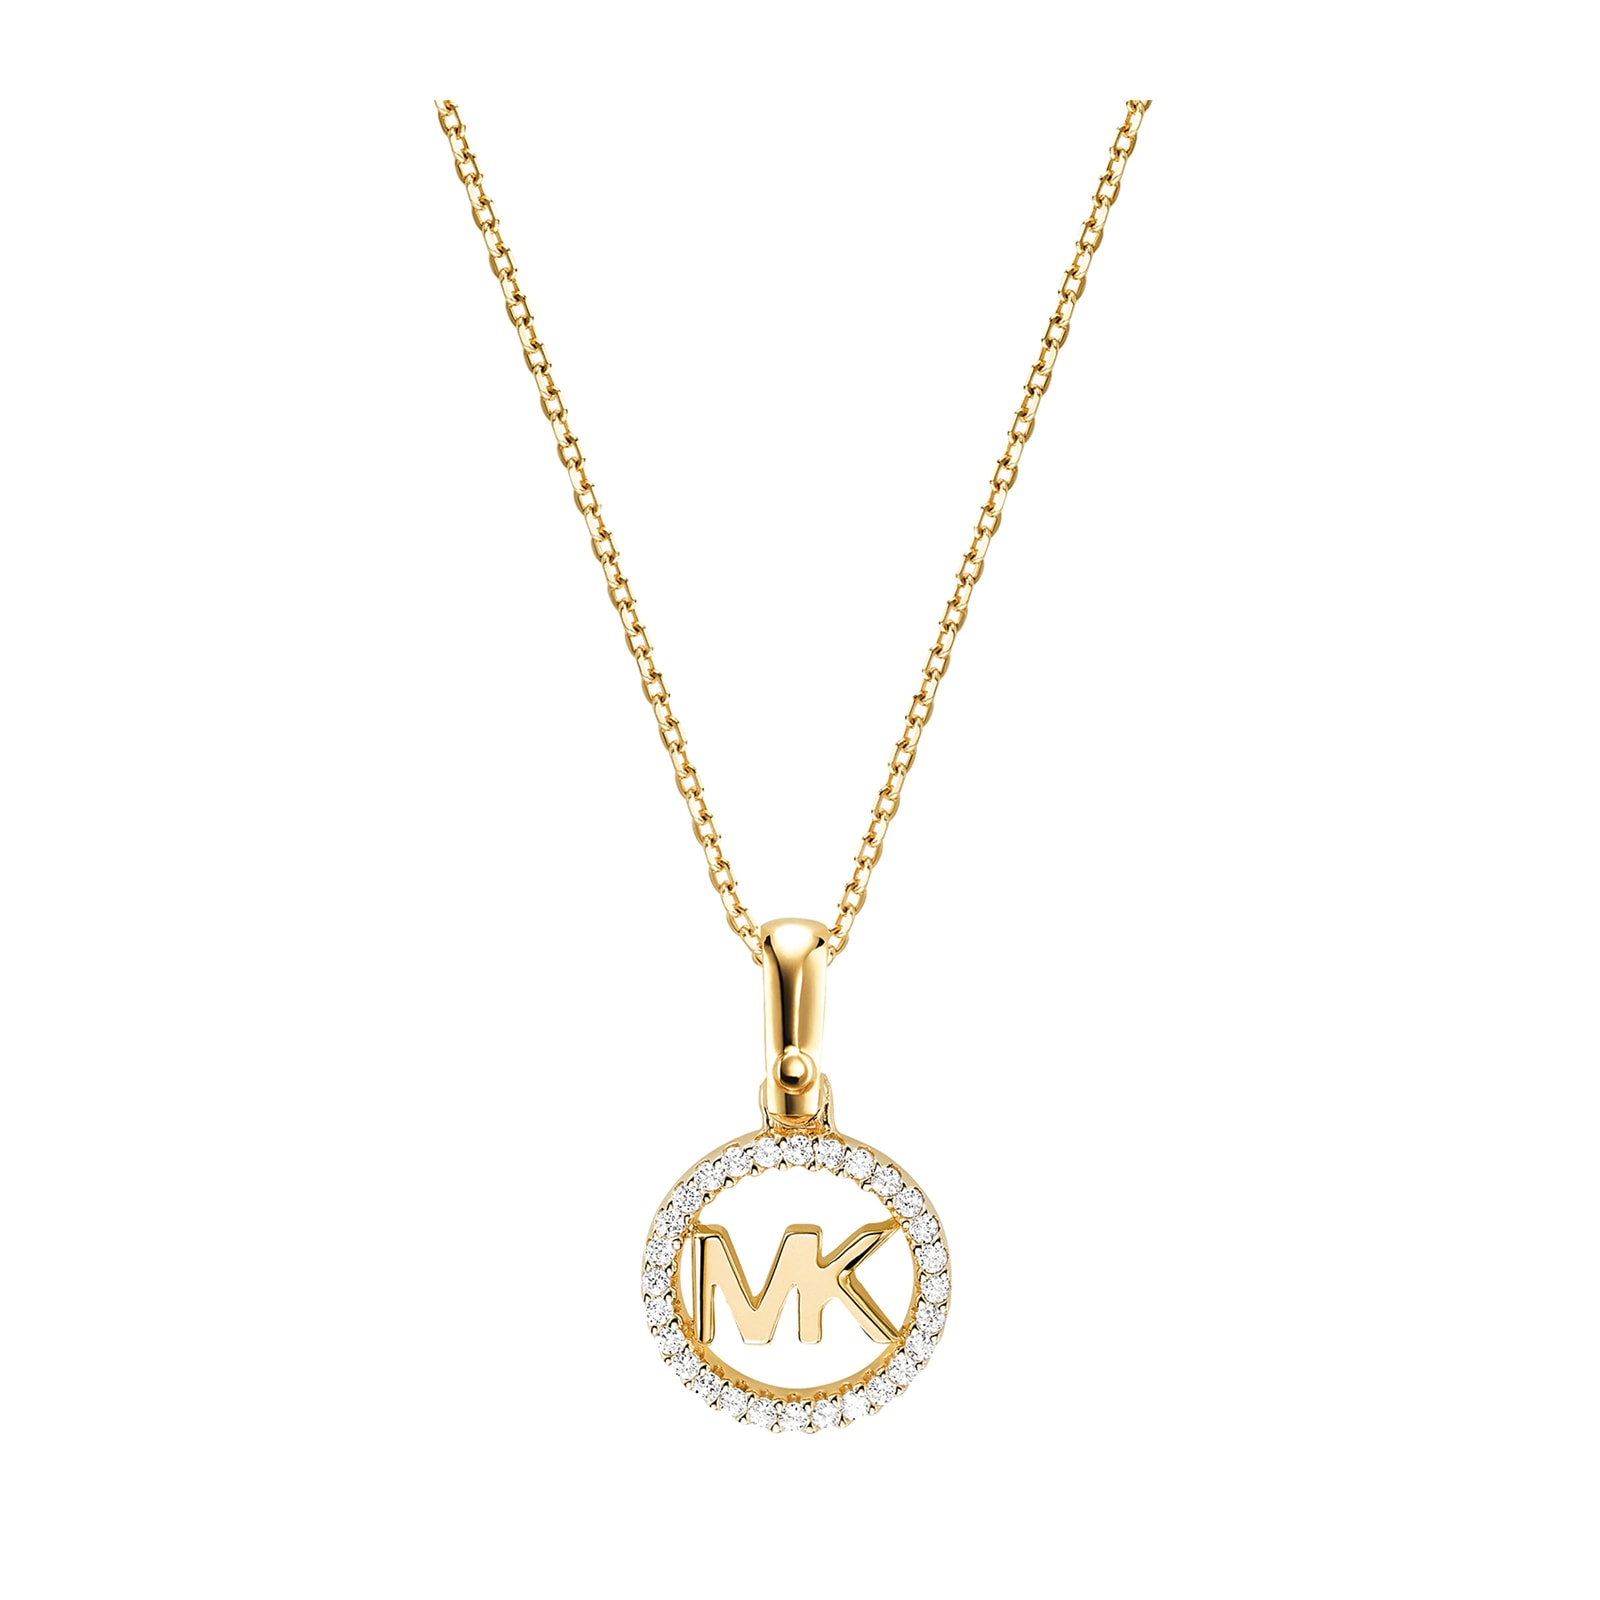 Custom Kors 14ct Gold Plated Charm Necklace